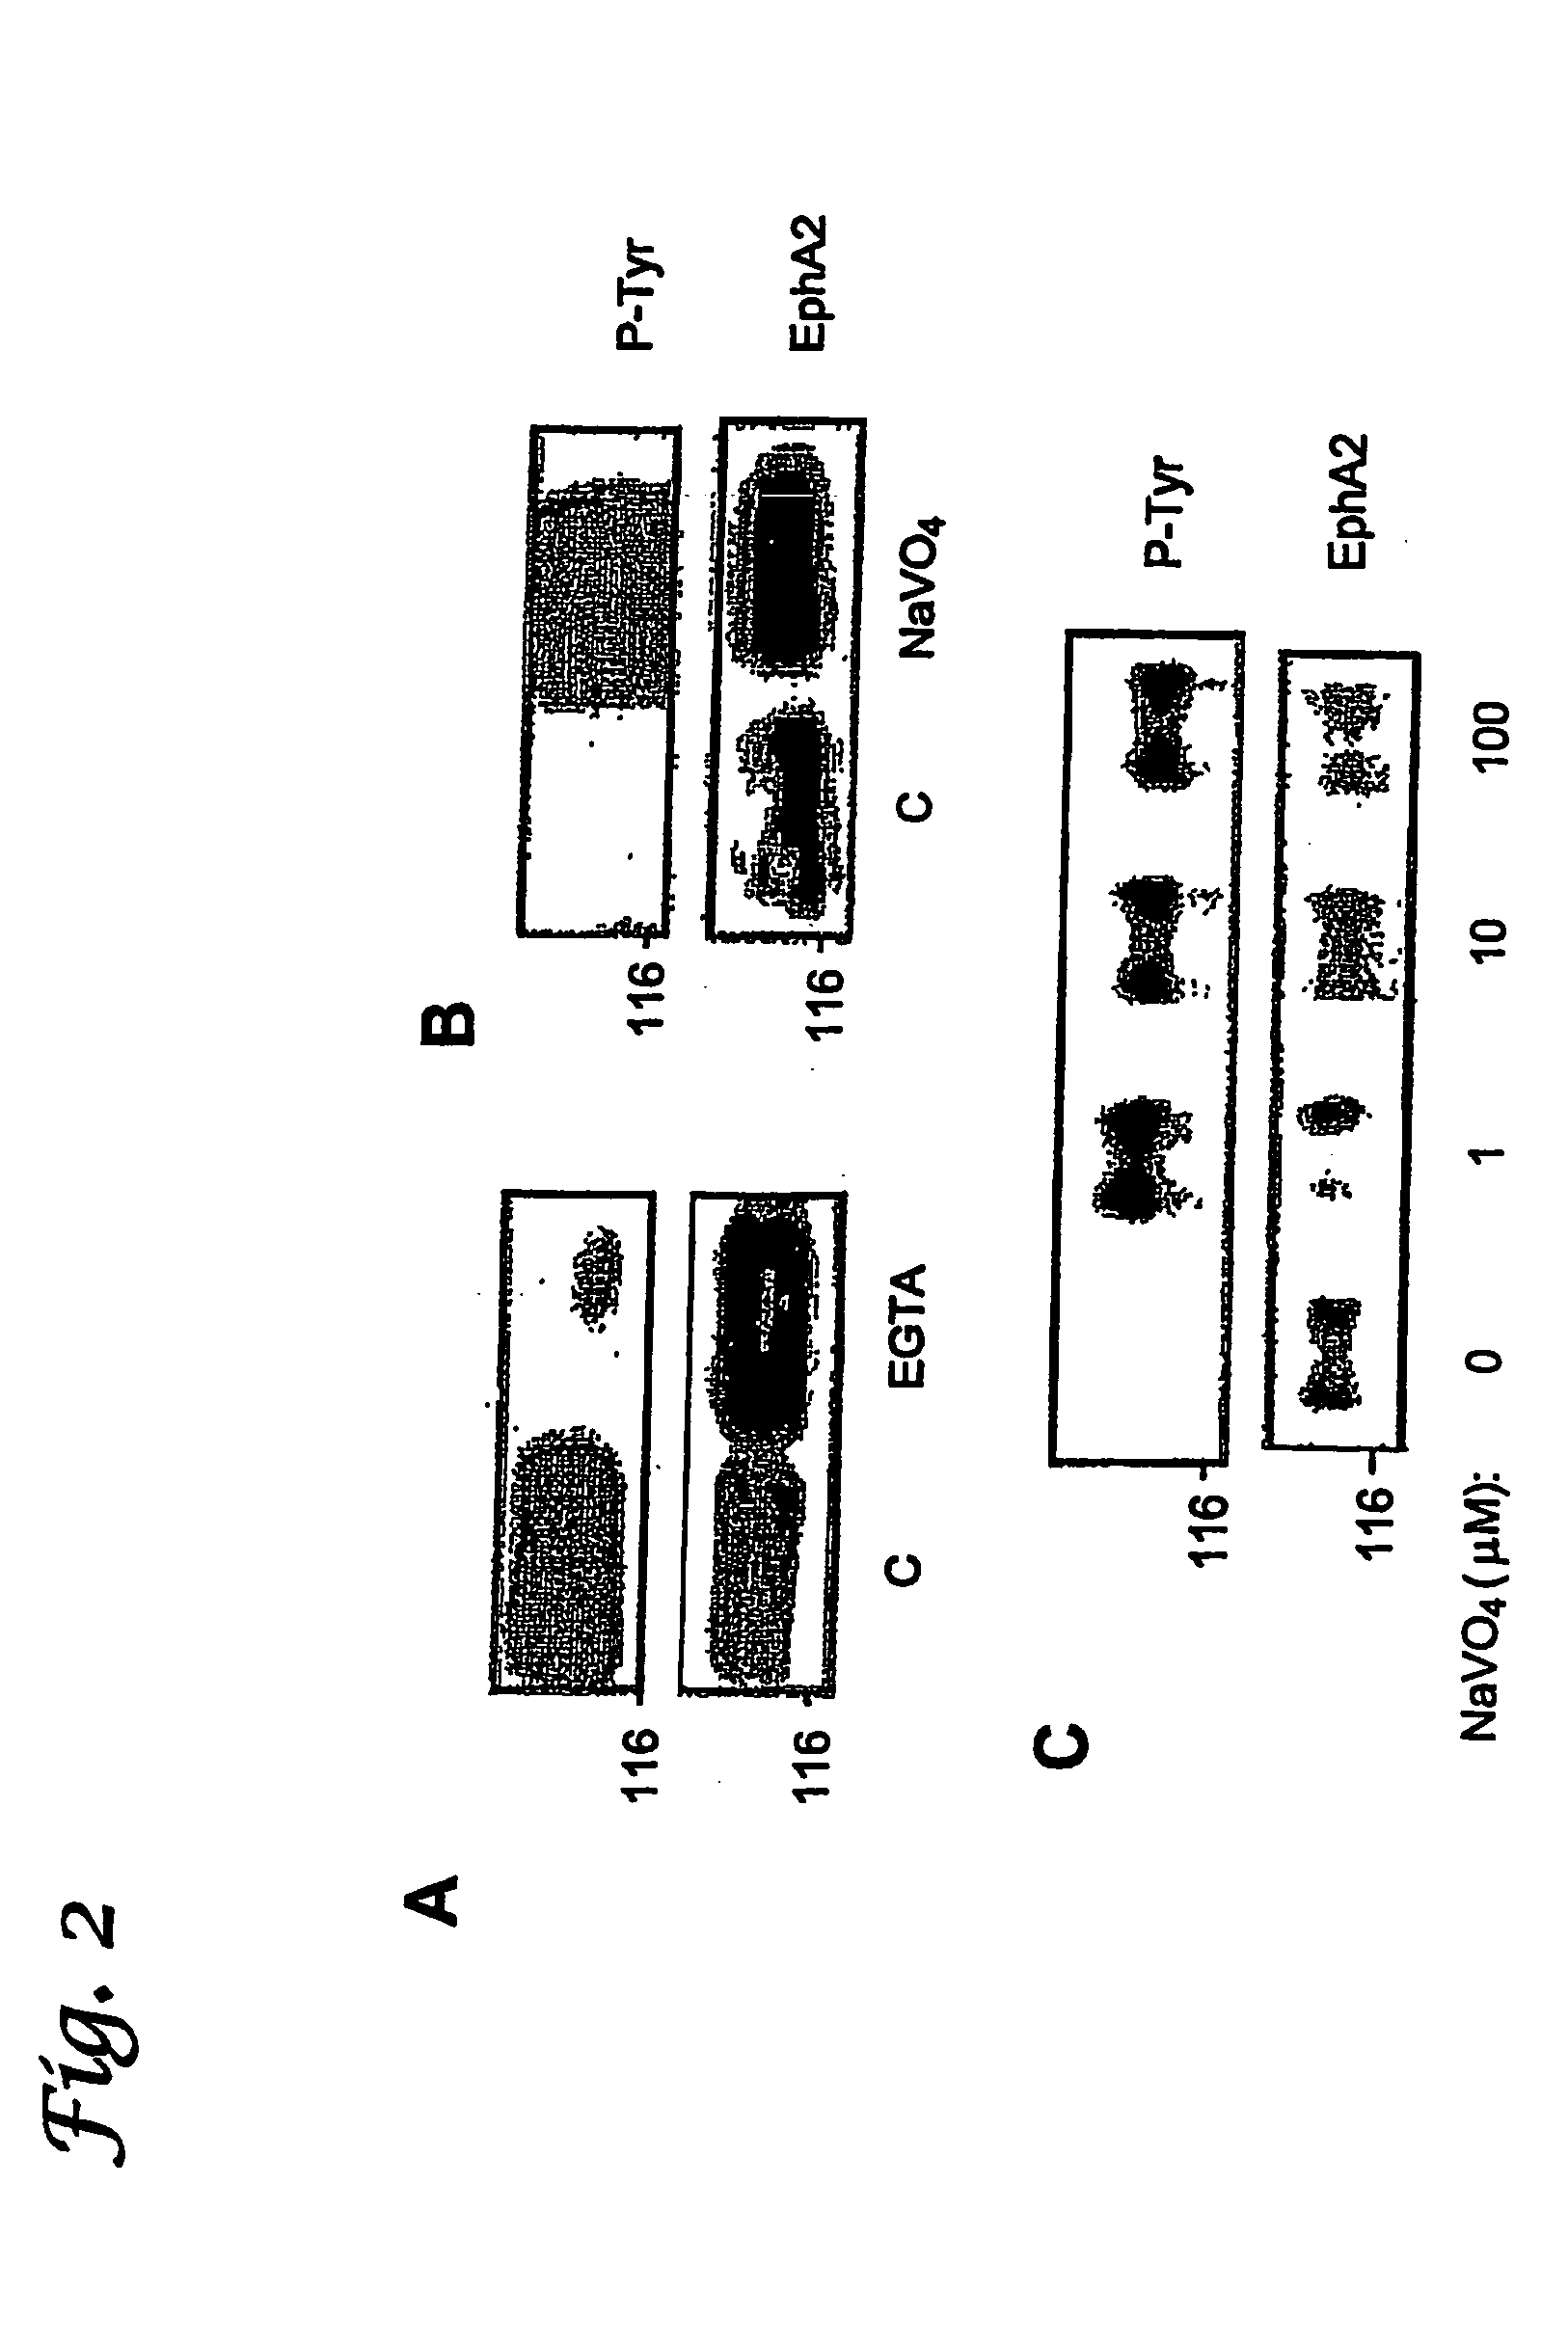 EphA2, EphA4 and LMW-PTP and methods of treatment of hyperproliferative cell disorders